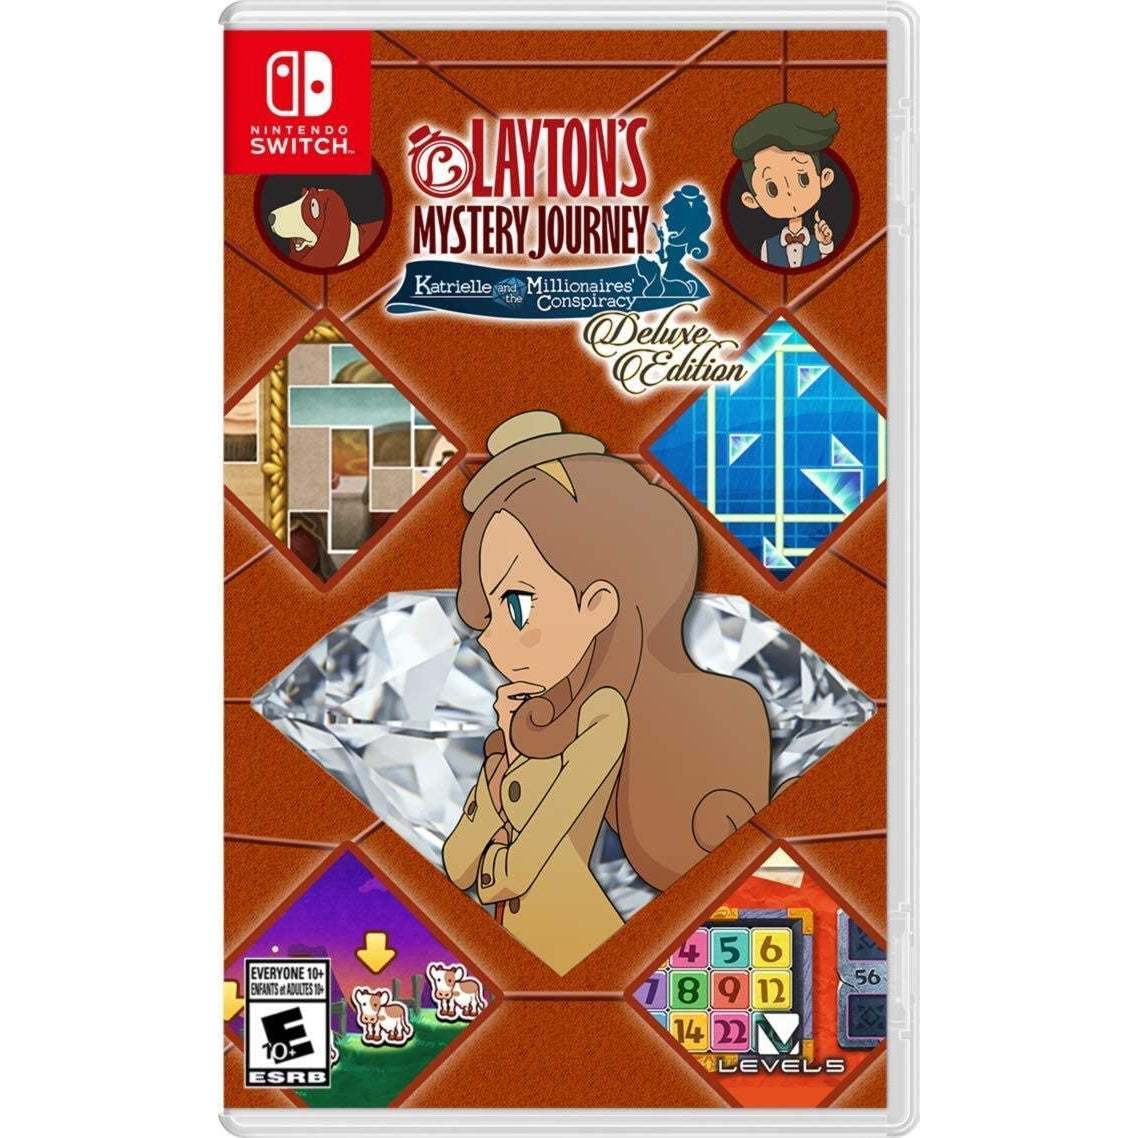 Layton's MYSTERY JOURNEY: Katrielle and the Millionaires' Conspiracy - Deluxe Edition (Nintendo Switch)